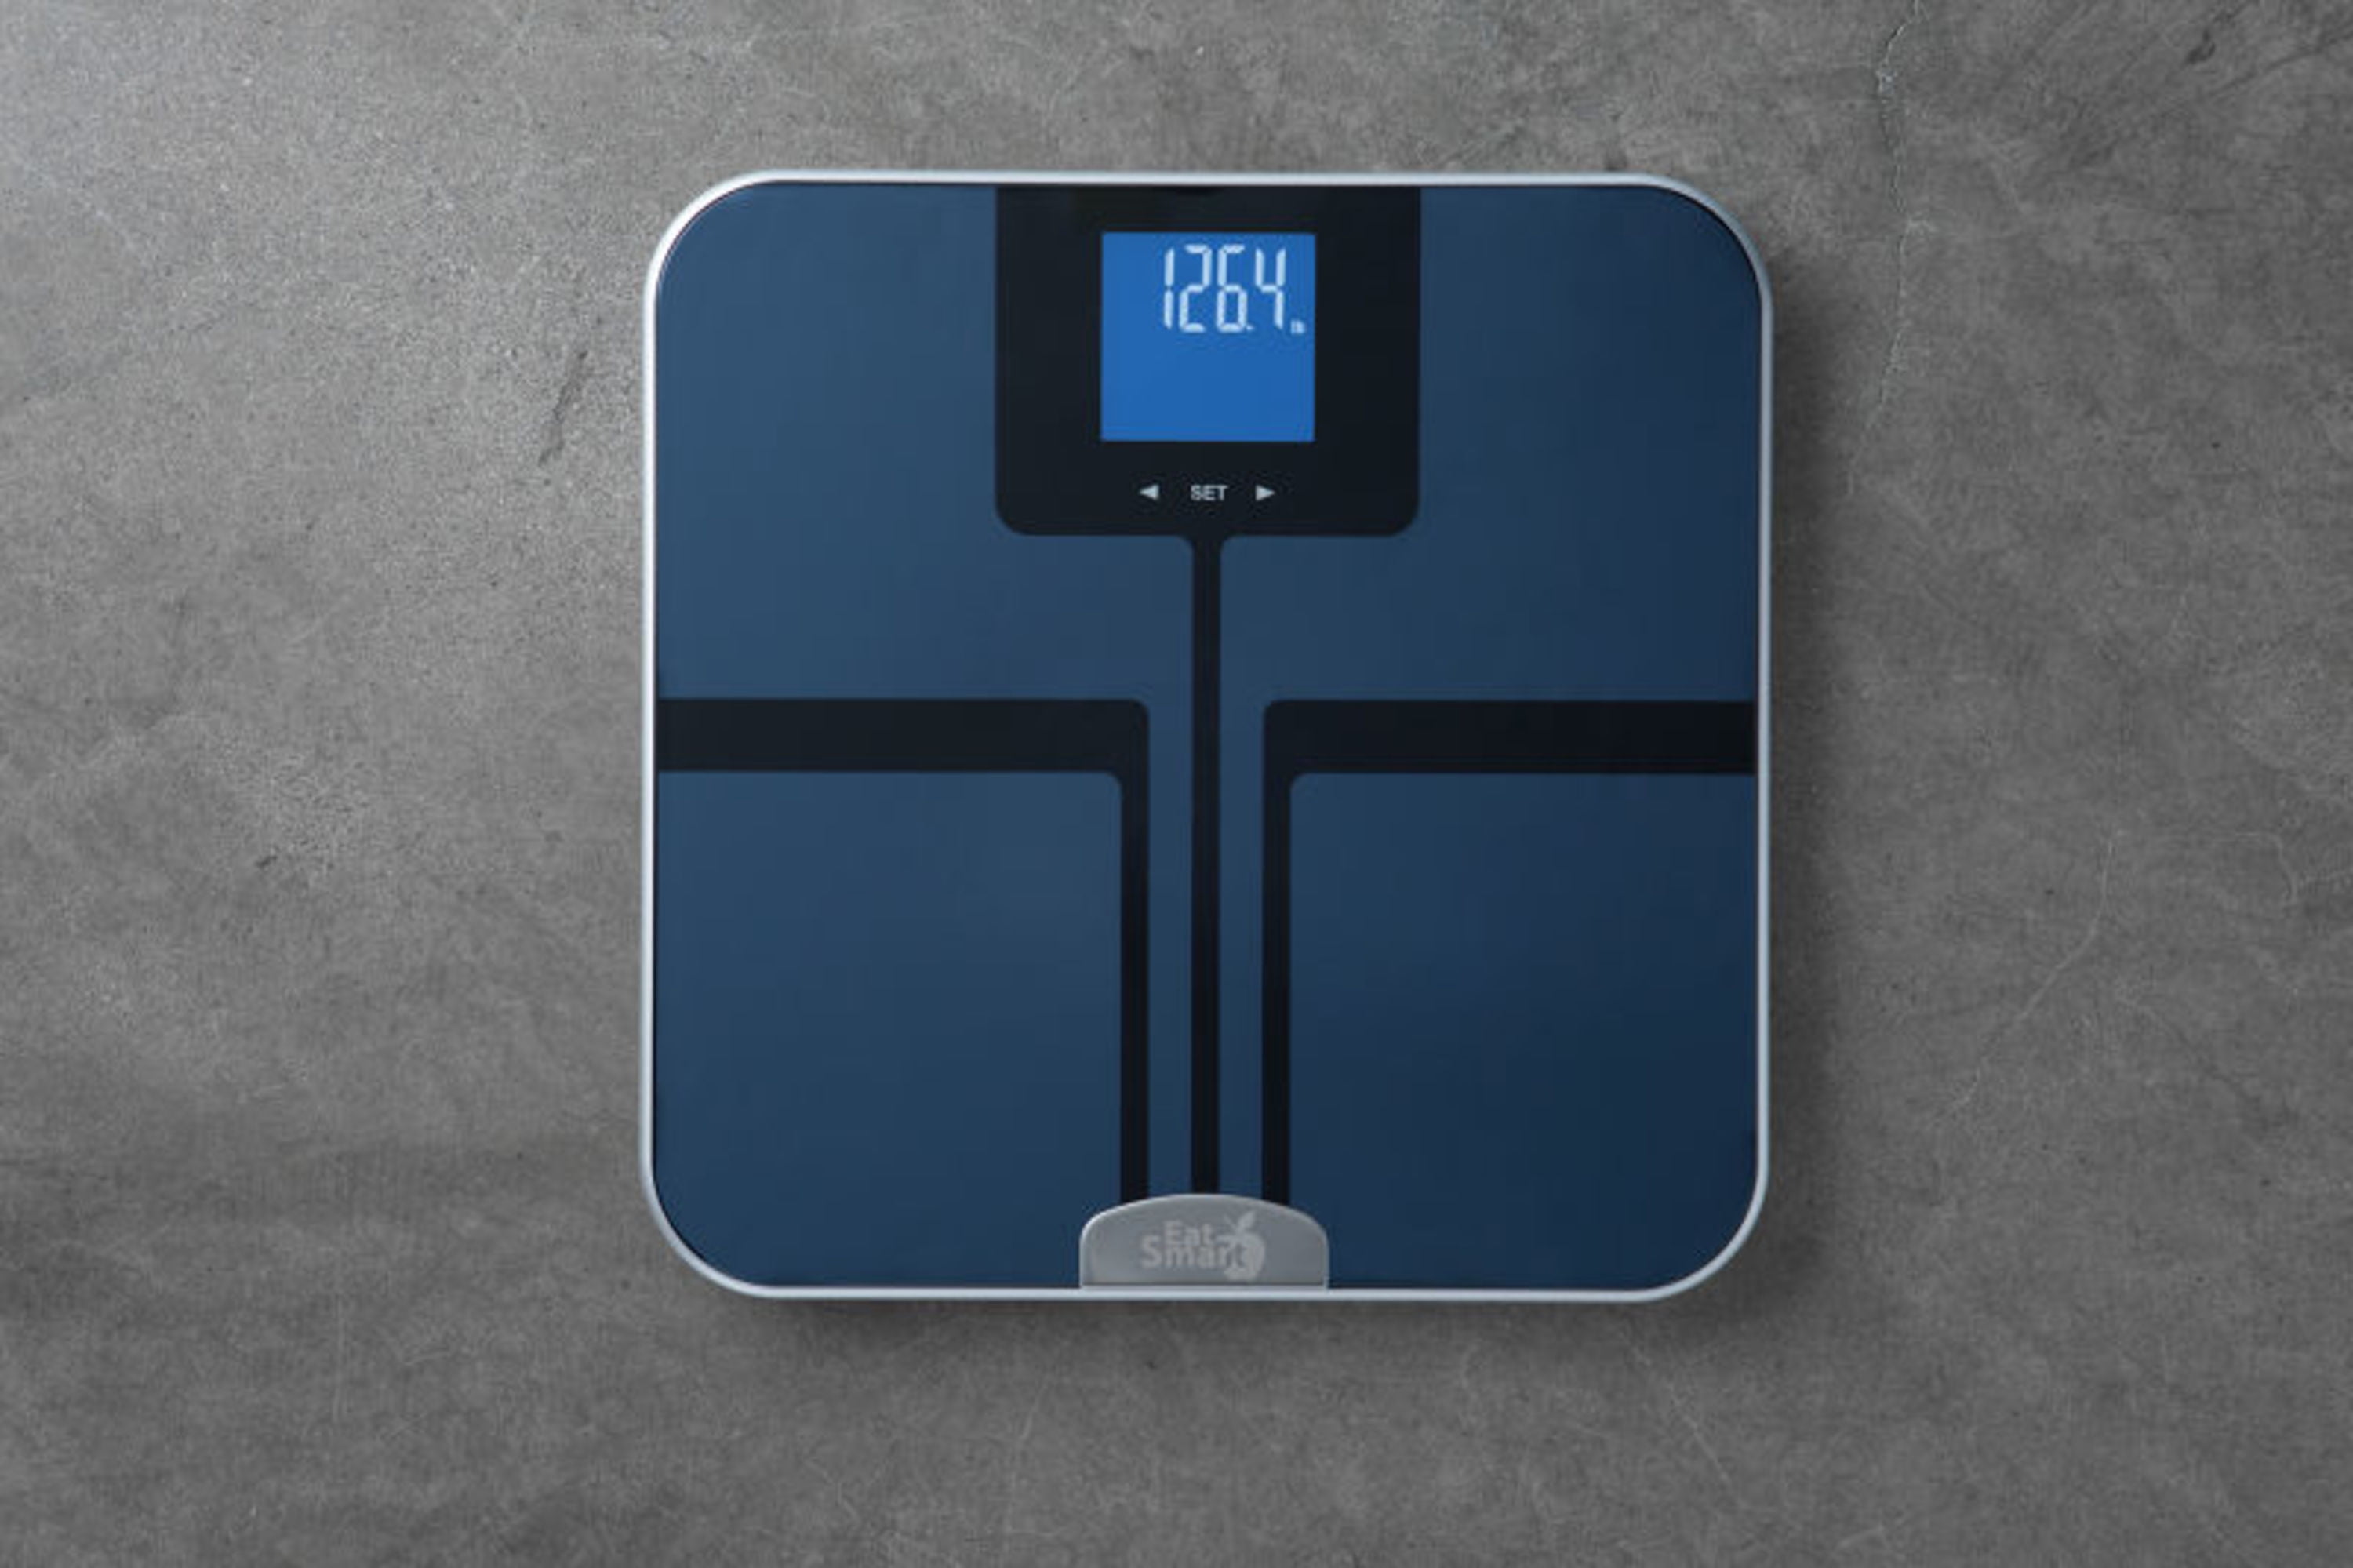  Eat Smart Precision Premium Digital Bathroom Scale with 3.5  inch Readout Display and Step-On Technology, Bath Scale for Body Weight,  400 lb Capacity, Black : Health & Household